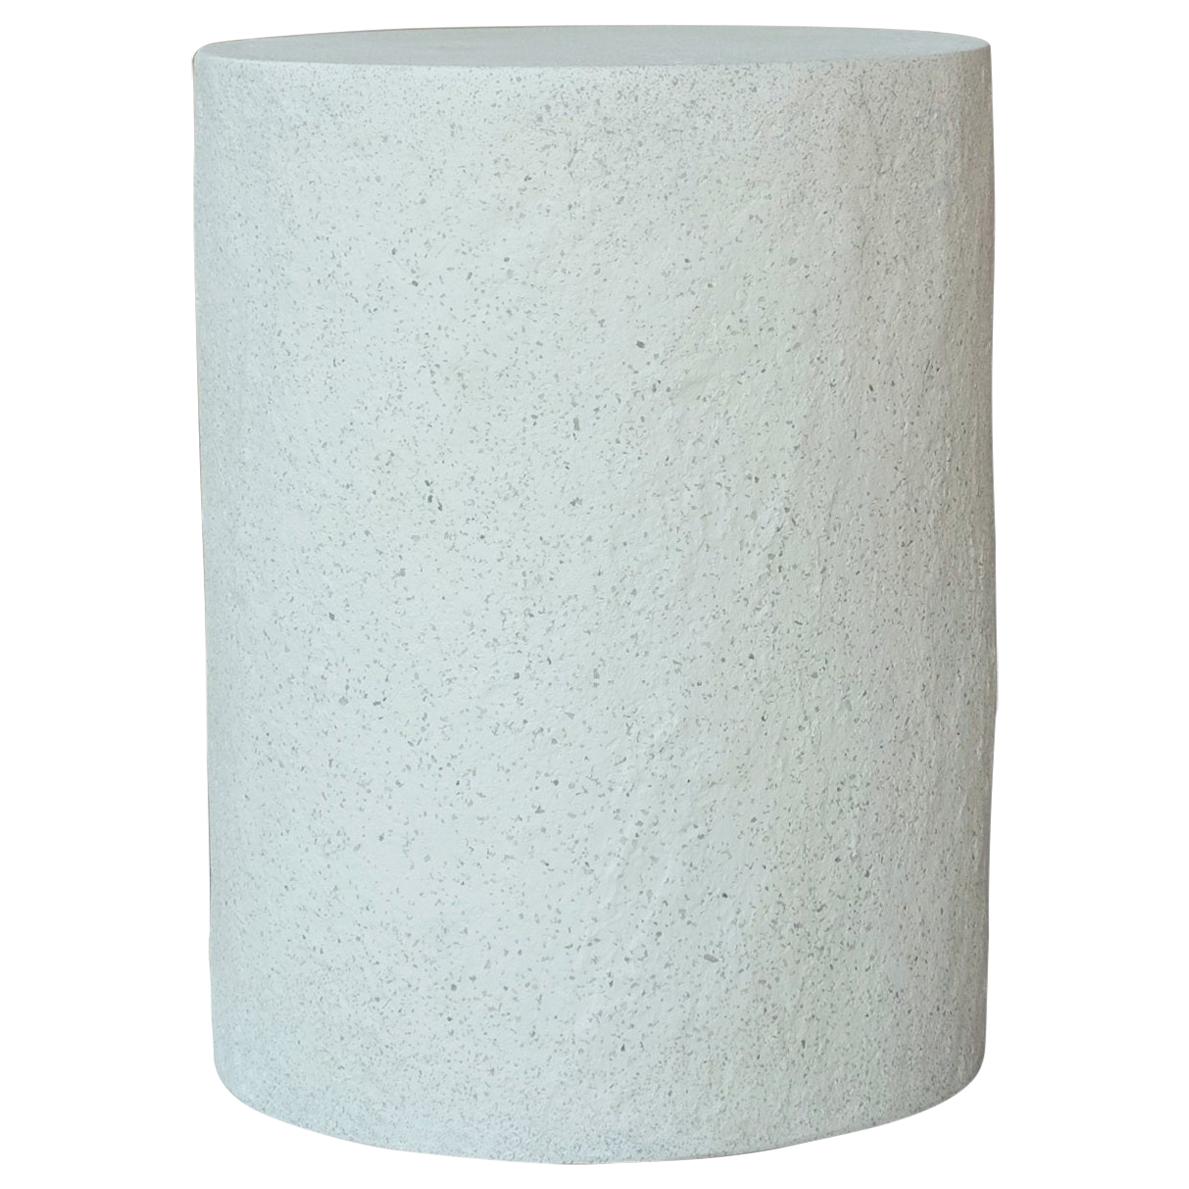 Cast Resin 'Dock' Stool and Side Table, White Stone Finish by Zachary A. Design